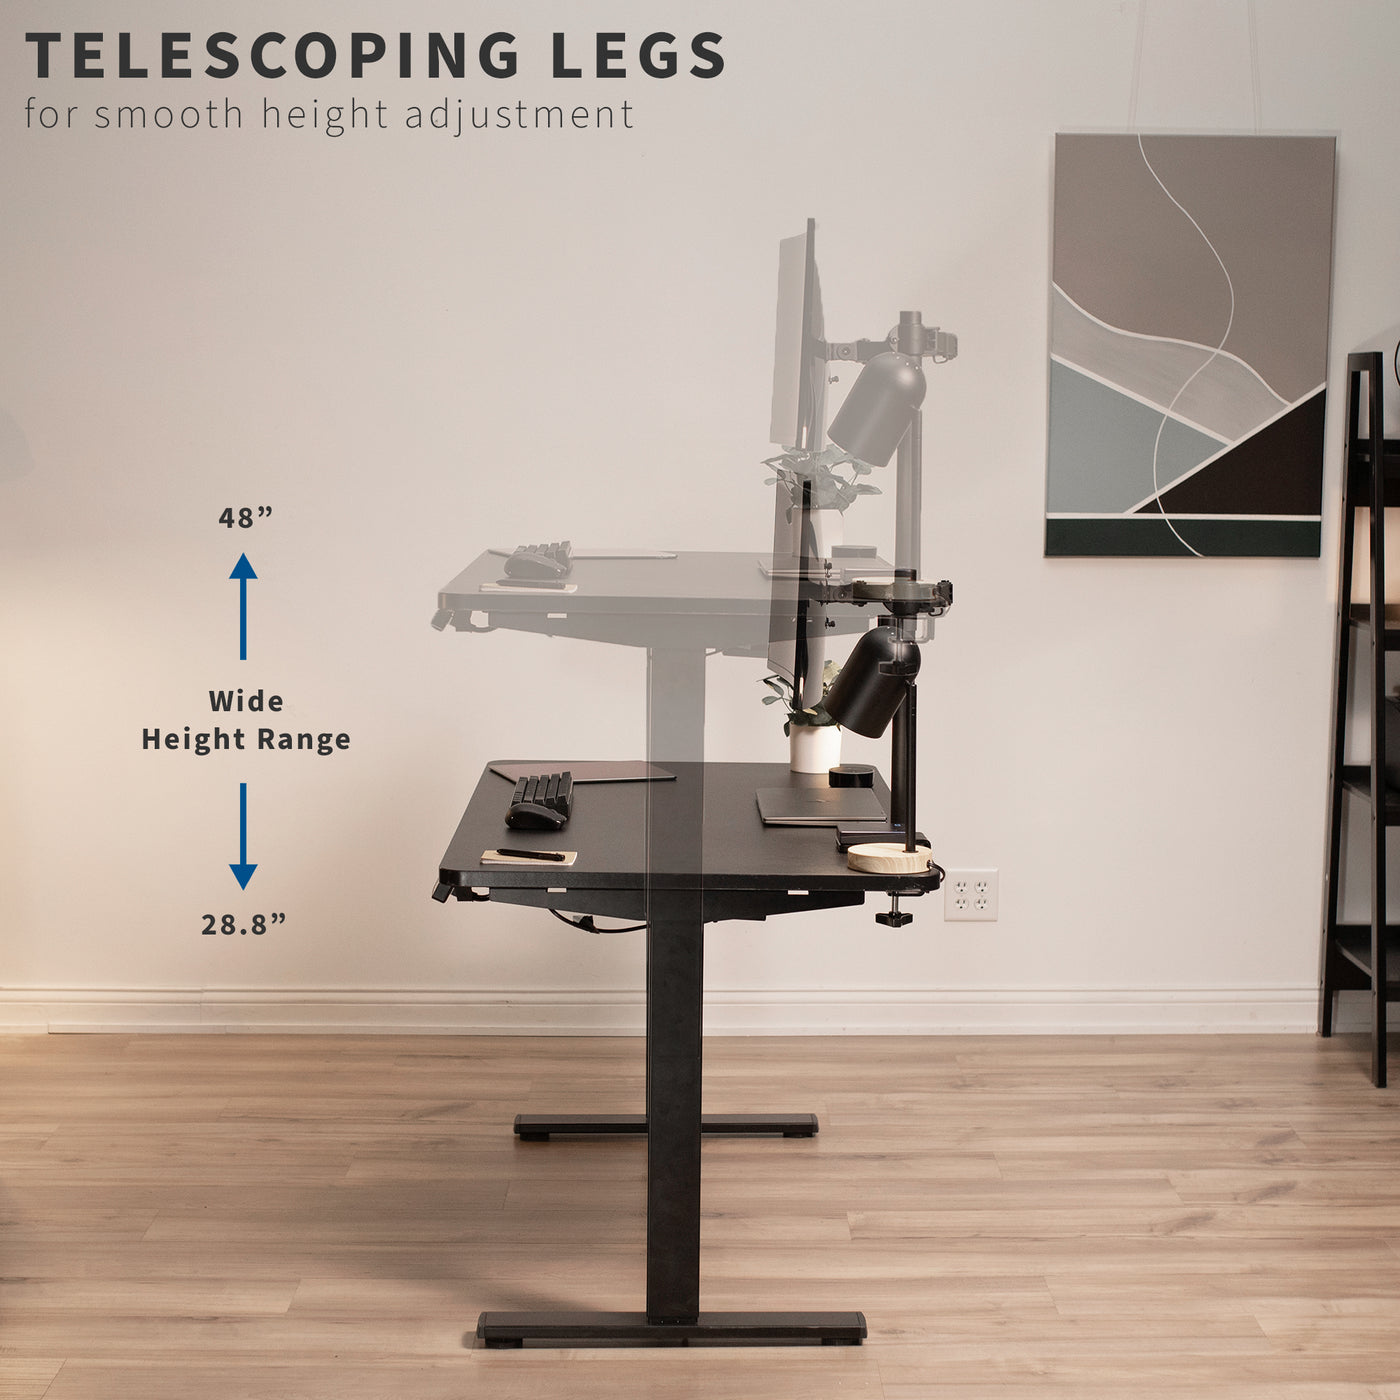 Advanced design with telescoping legs for an extra smooth transition from sitting to standing.